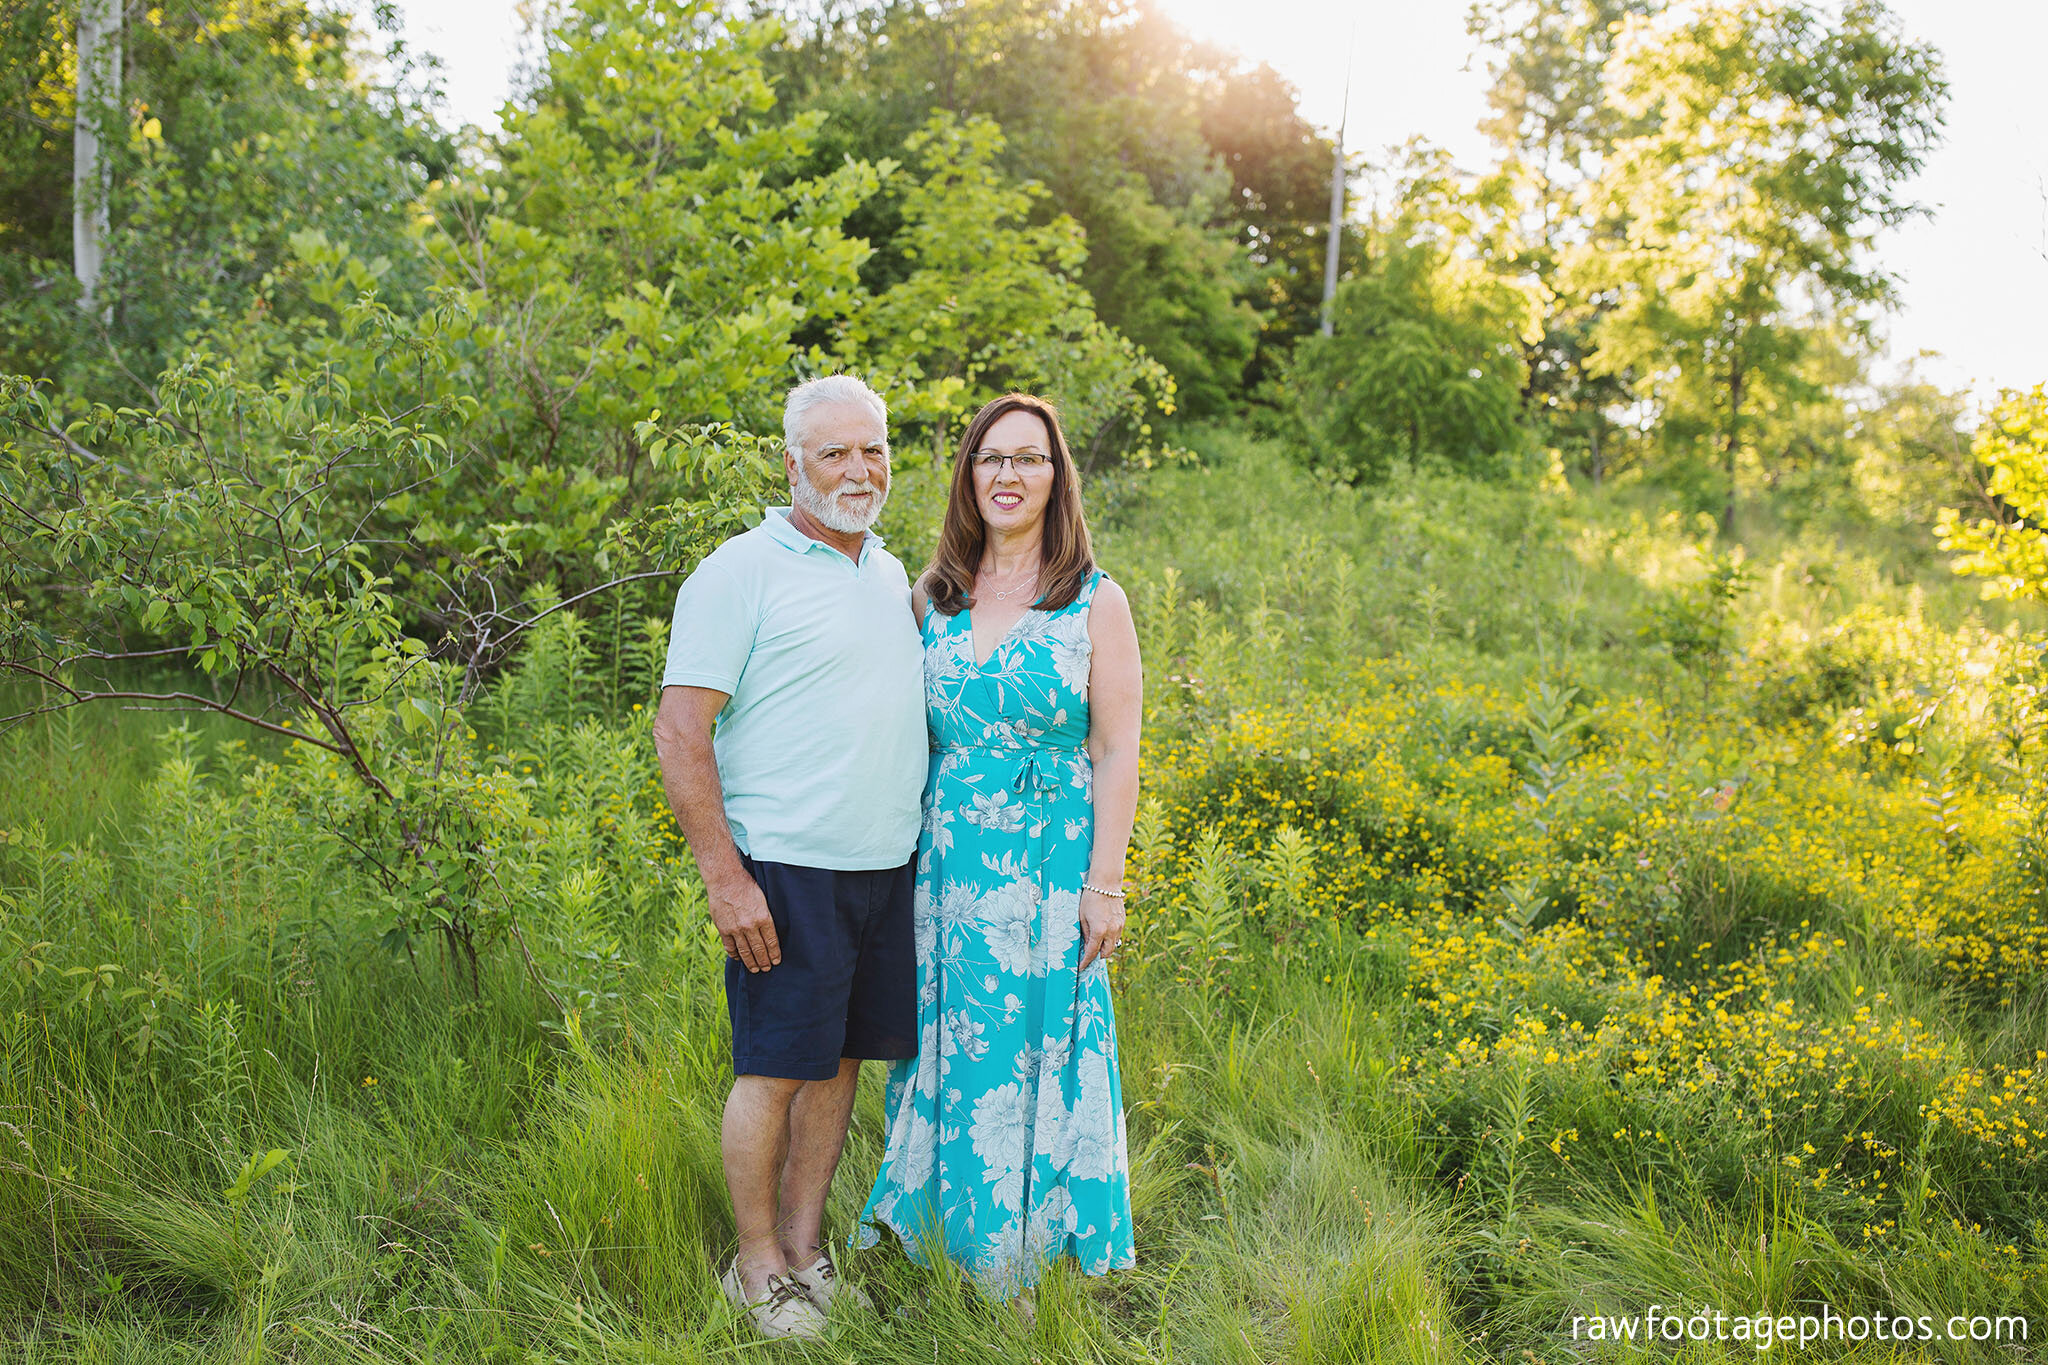 london_ontario_family_photographer-extended_family_session-grandparents-cousins-backyard_session-civic_gardens-raw_footage_photography-003.jpg